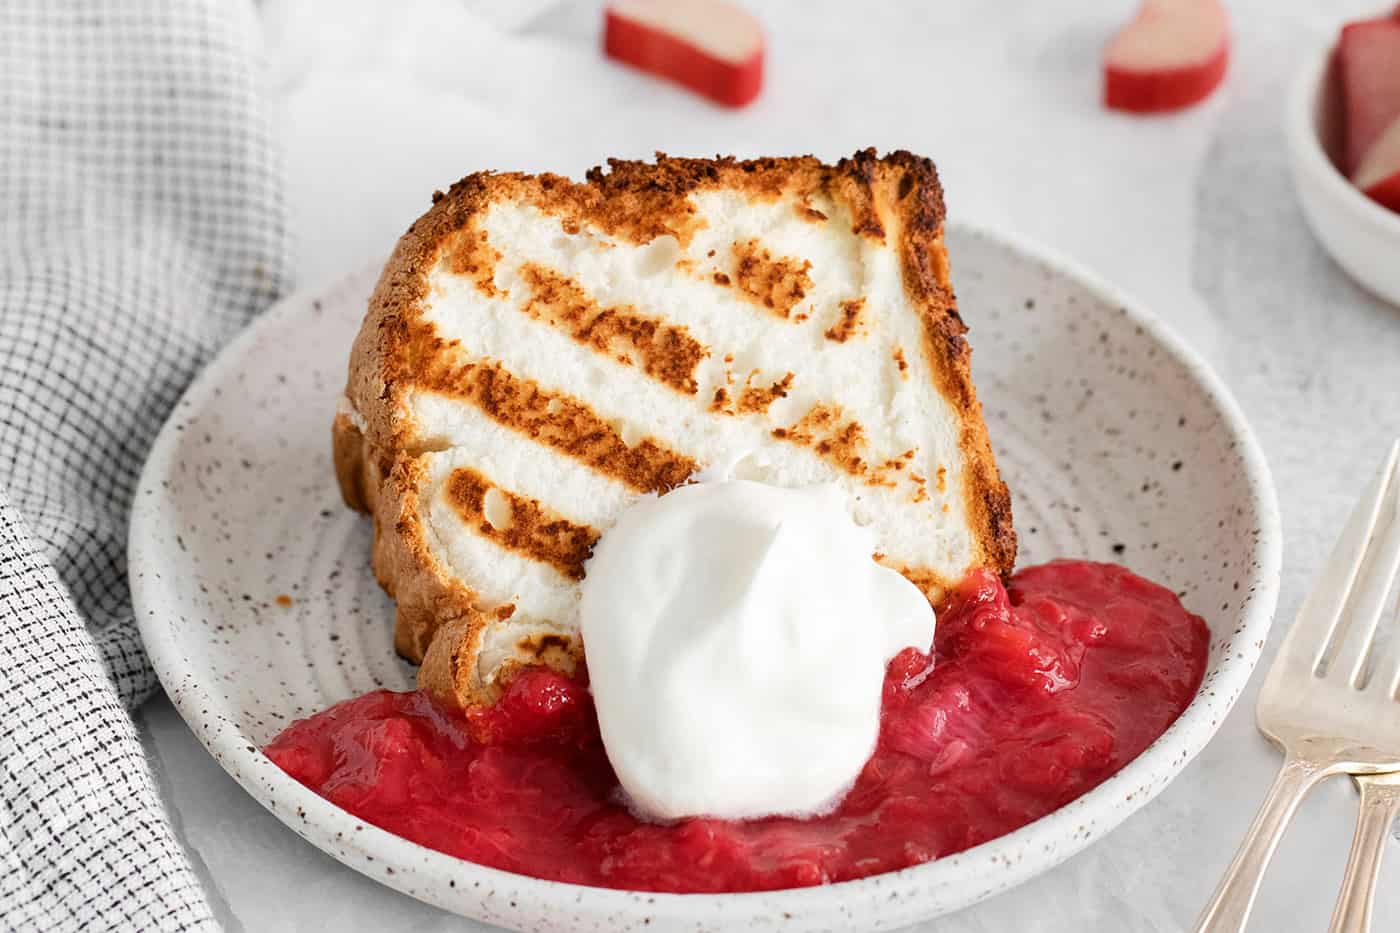 A slice of grilled angel food cake on a plate with raspberry sauce and whipped cream